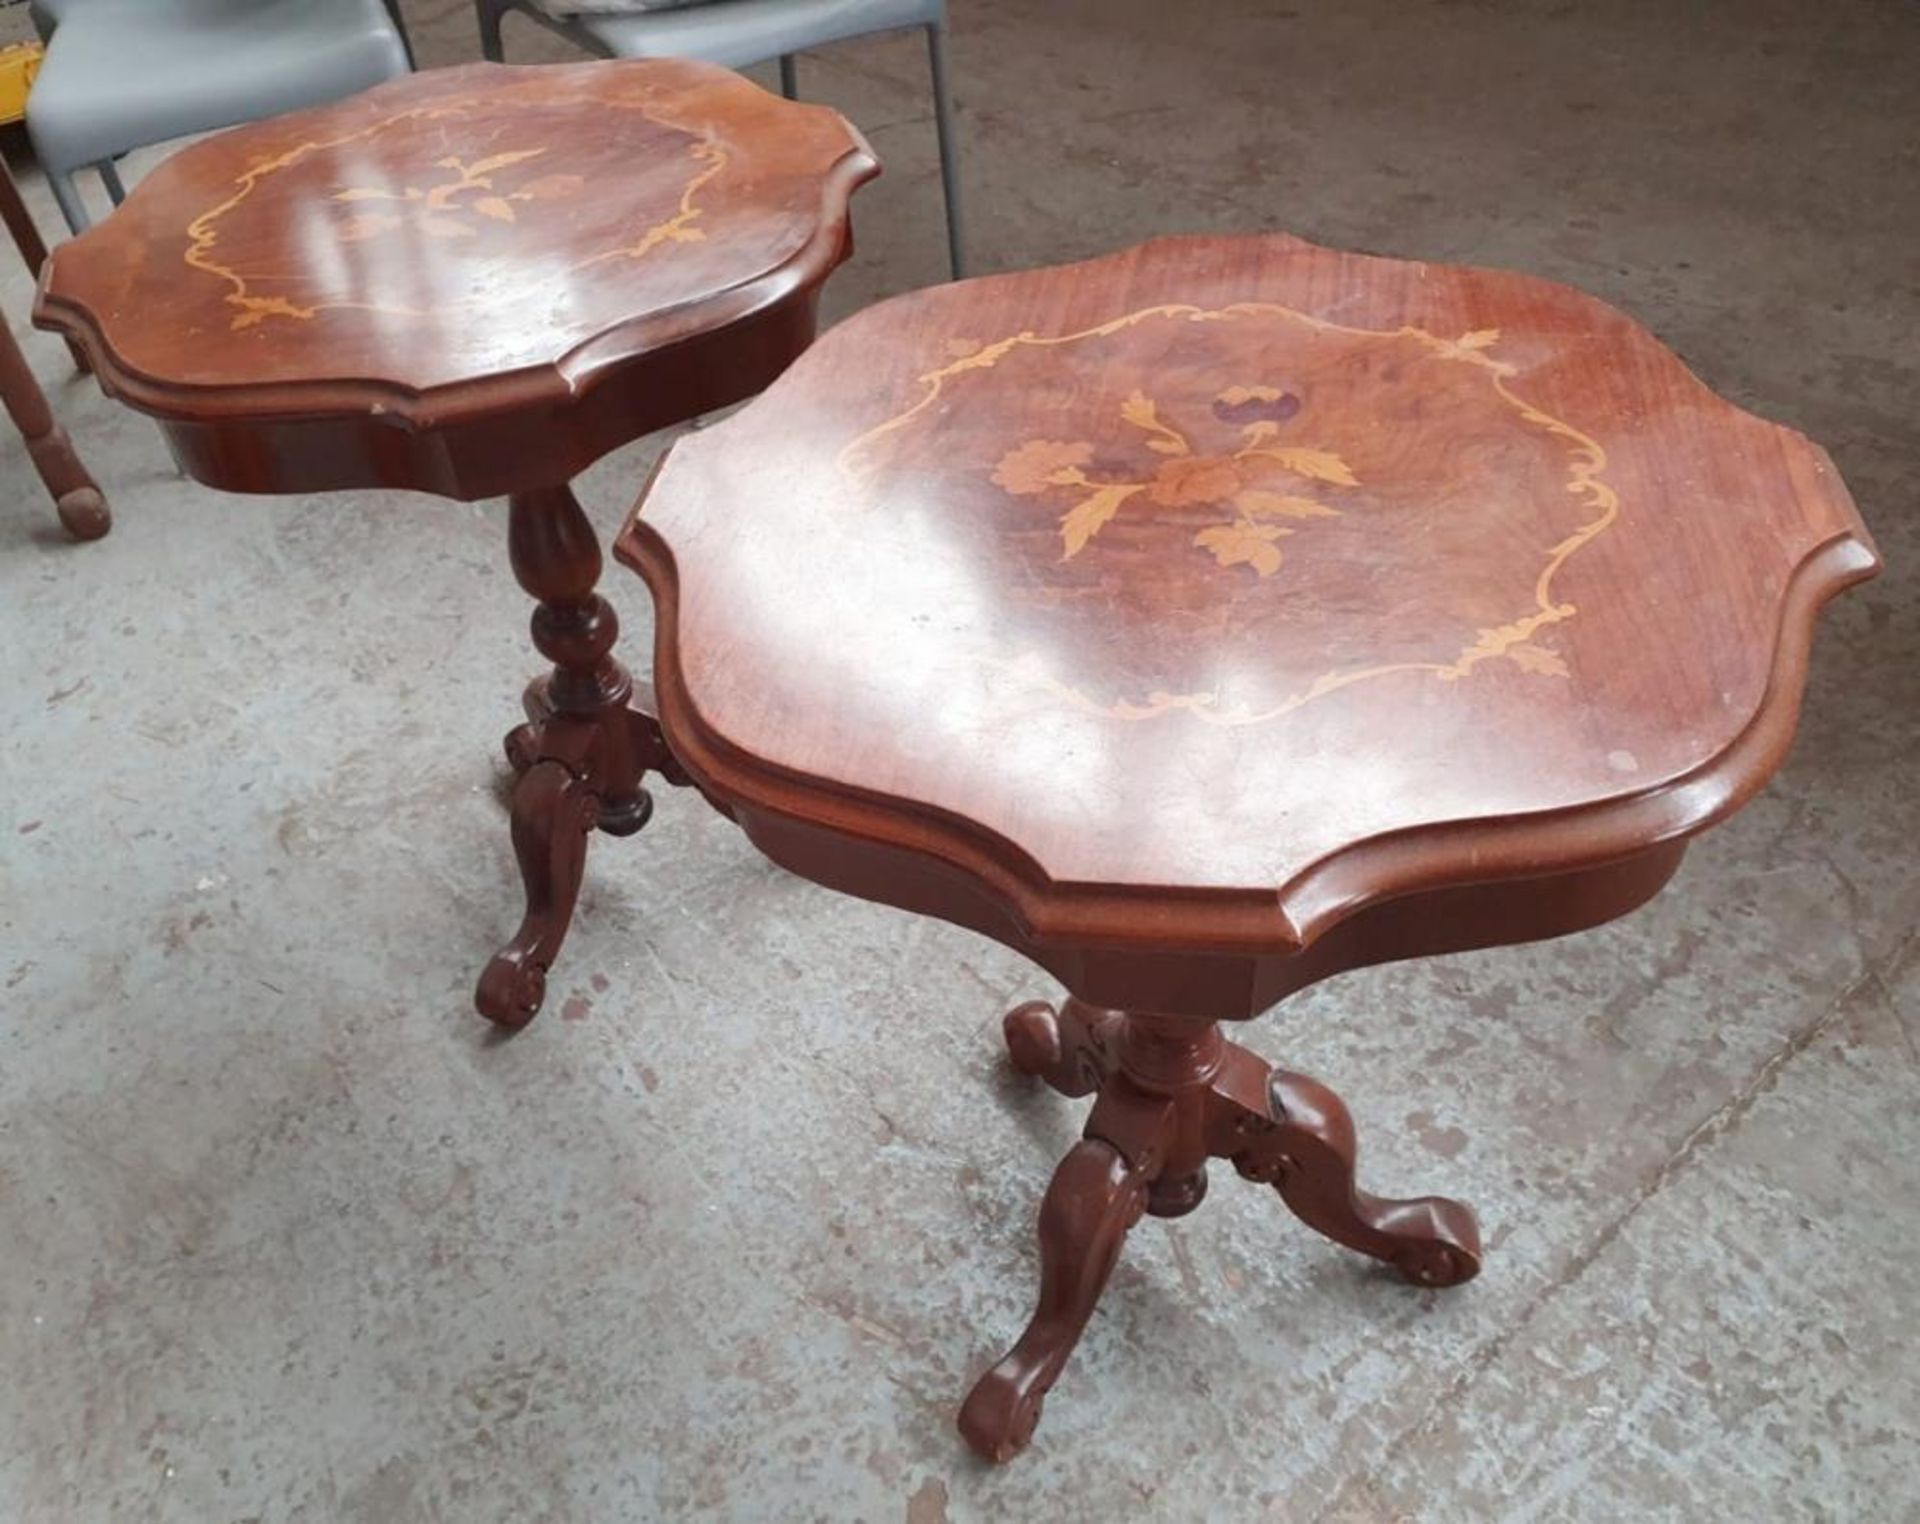 A Pair Of Period-Style Side / Lamp Tables With Ornate Legs - Unused Boxed Stock - £1 Start, No Reser - Image 3 of 8